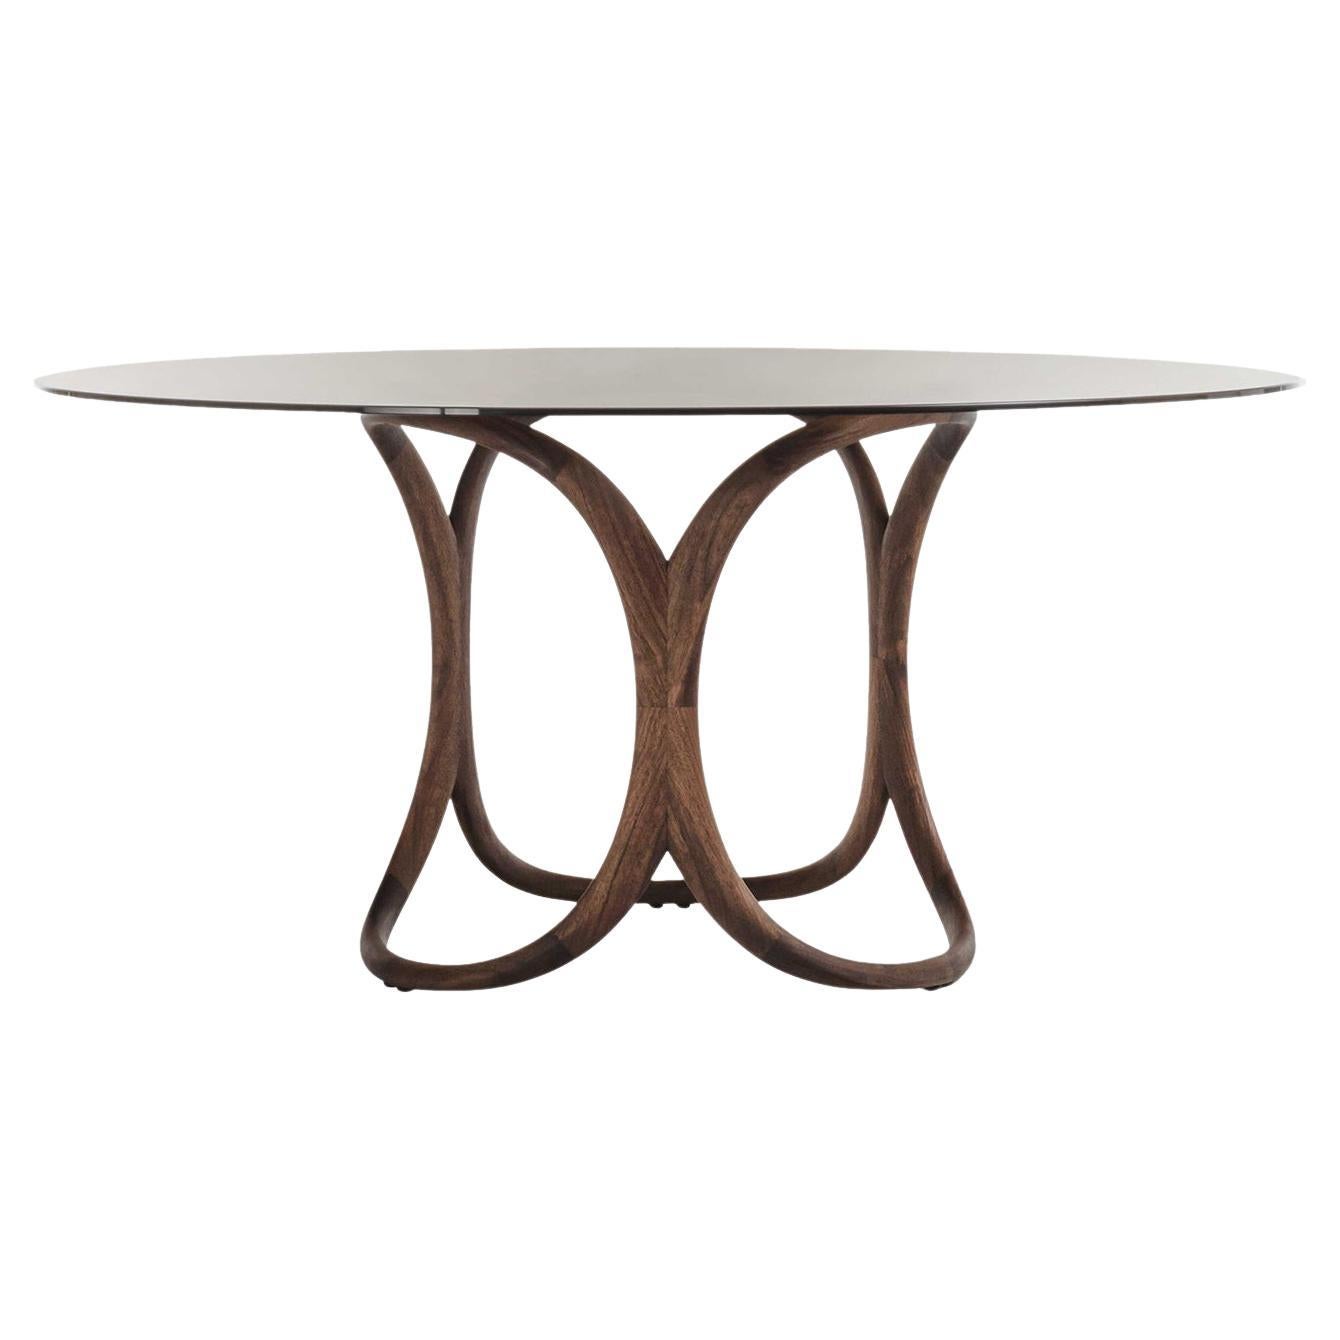 Marlena Table by Studio Nove.3 For Sale